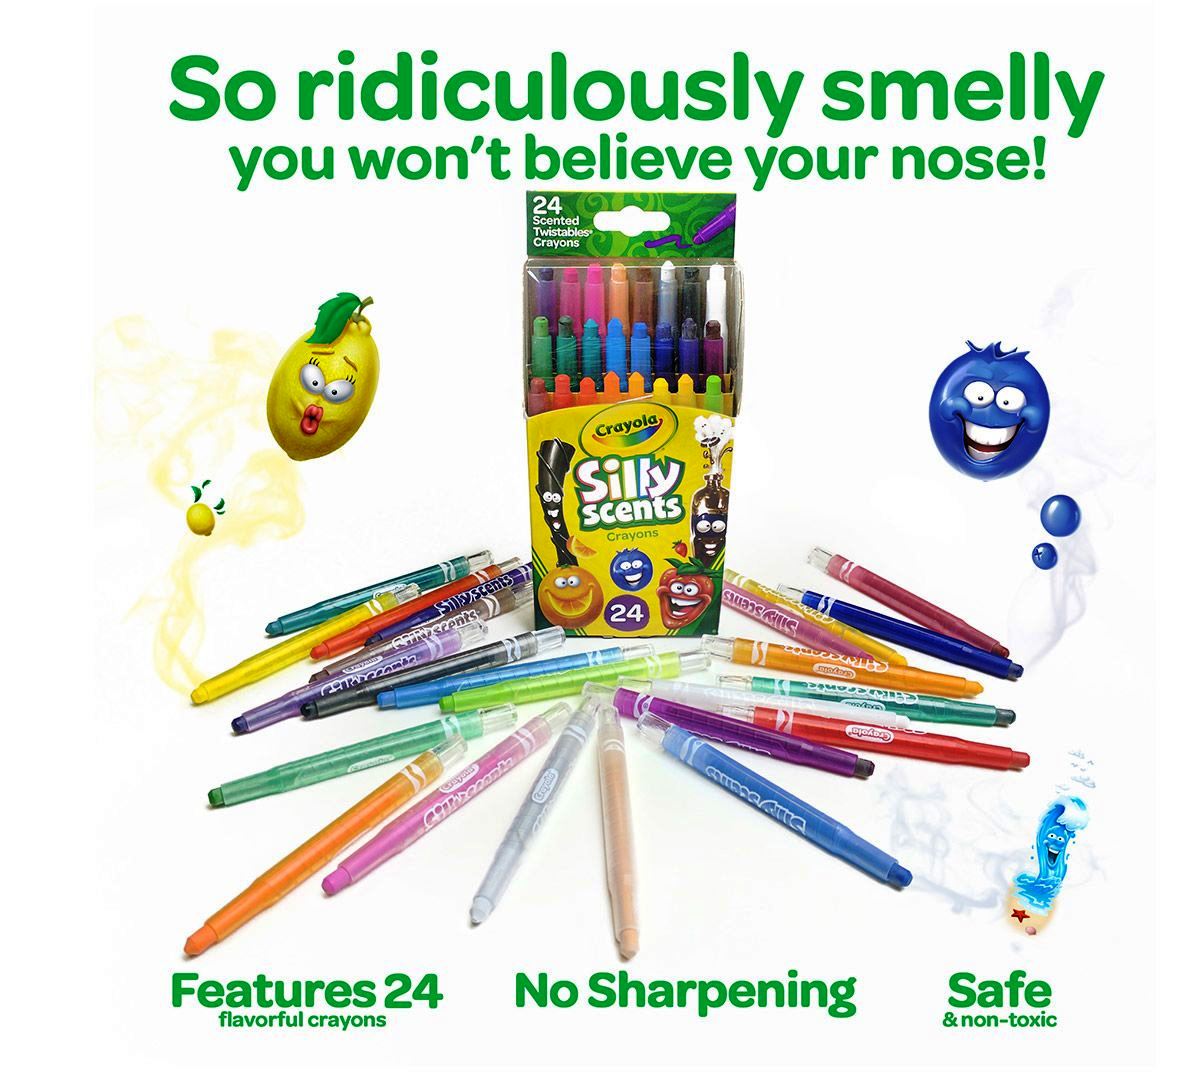 Crayola Silly Scents Mini Twistables Scented Crayons, 12 per Pack, 6 Packs